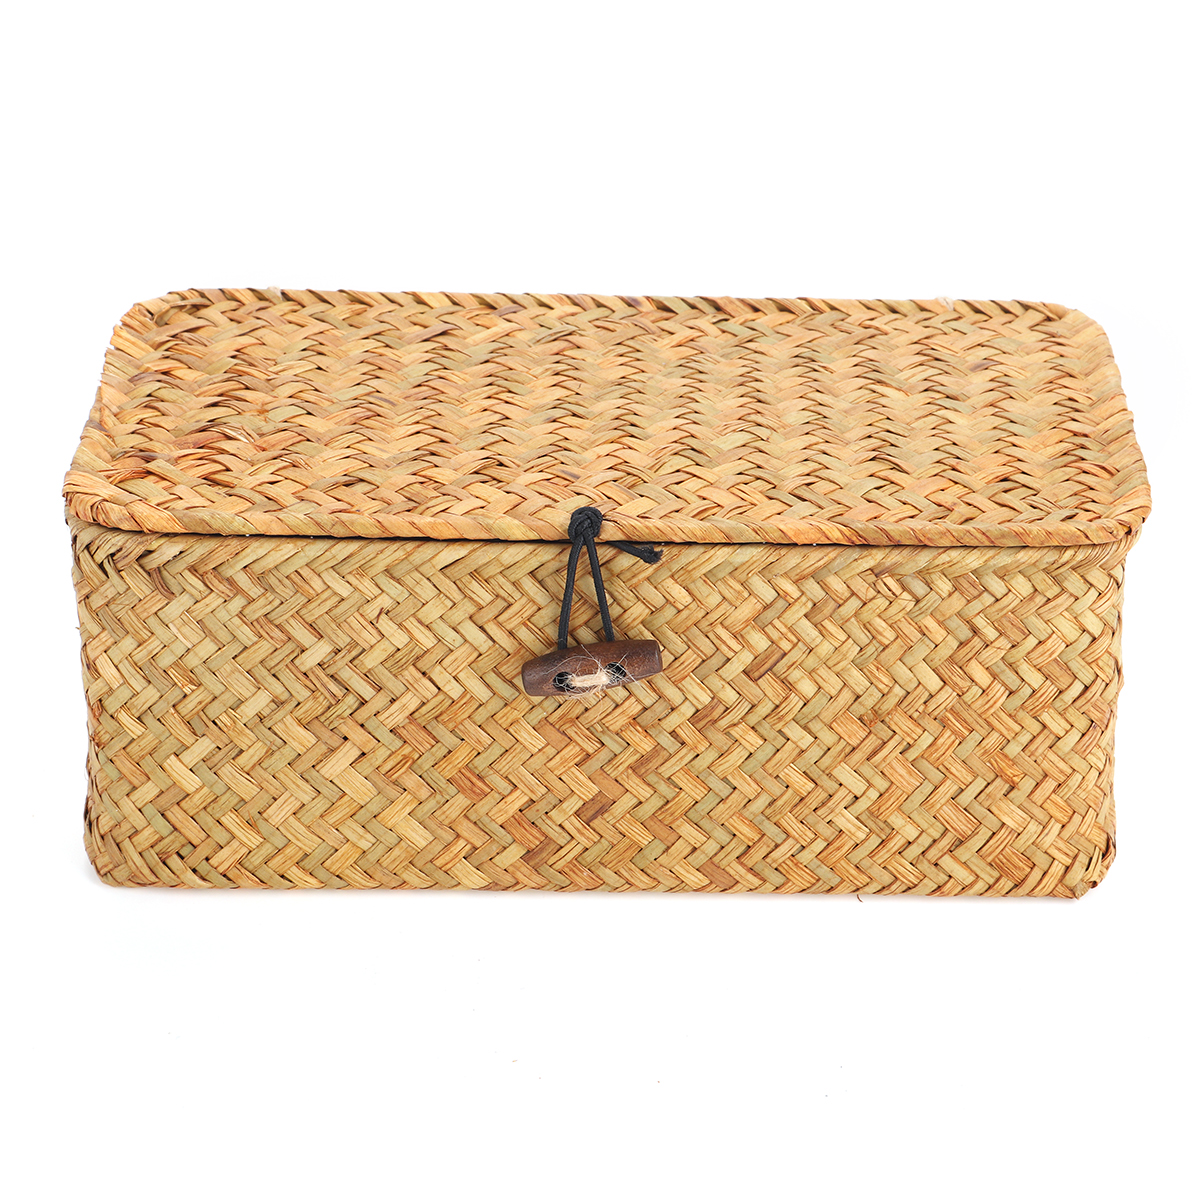 Storage-Box-Rectangular-Straw-Flower-Basket-with-Cover-Home-Garden-Fruit-Clothes-1748147-7